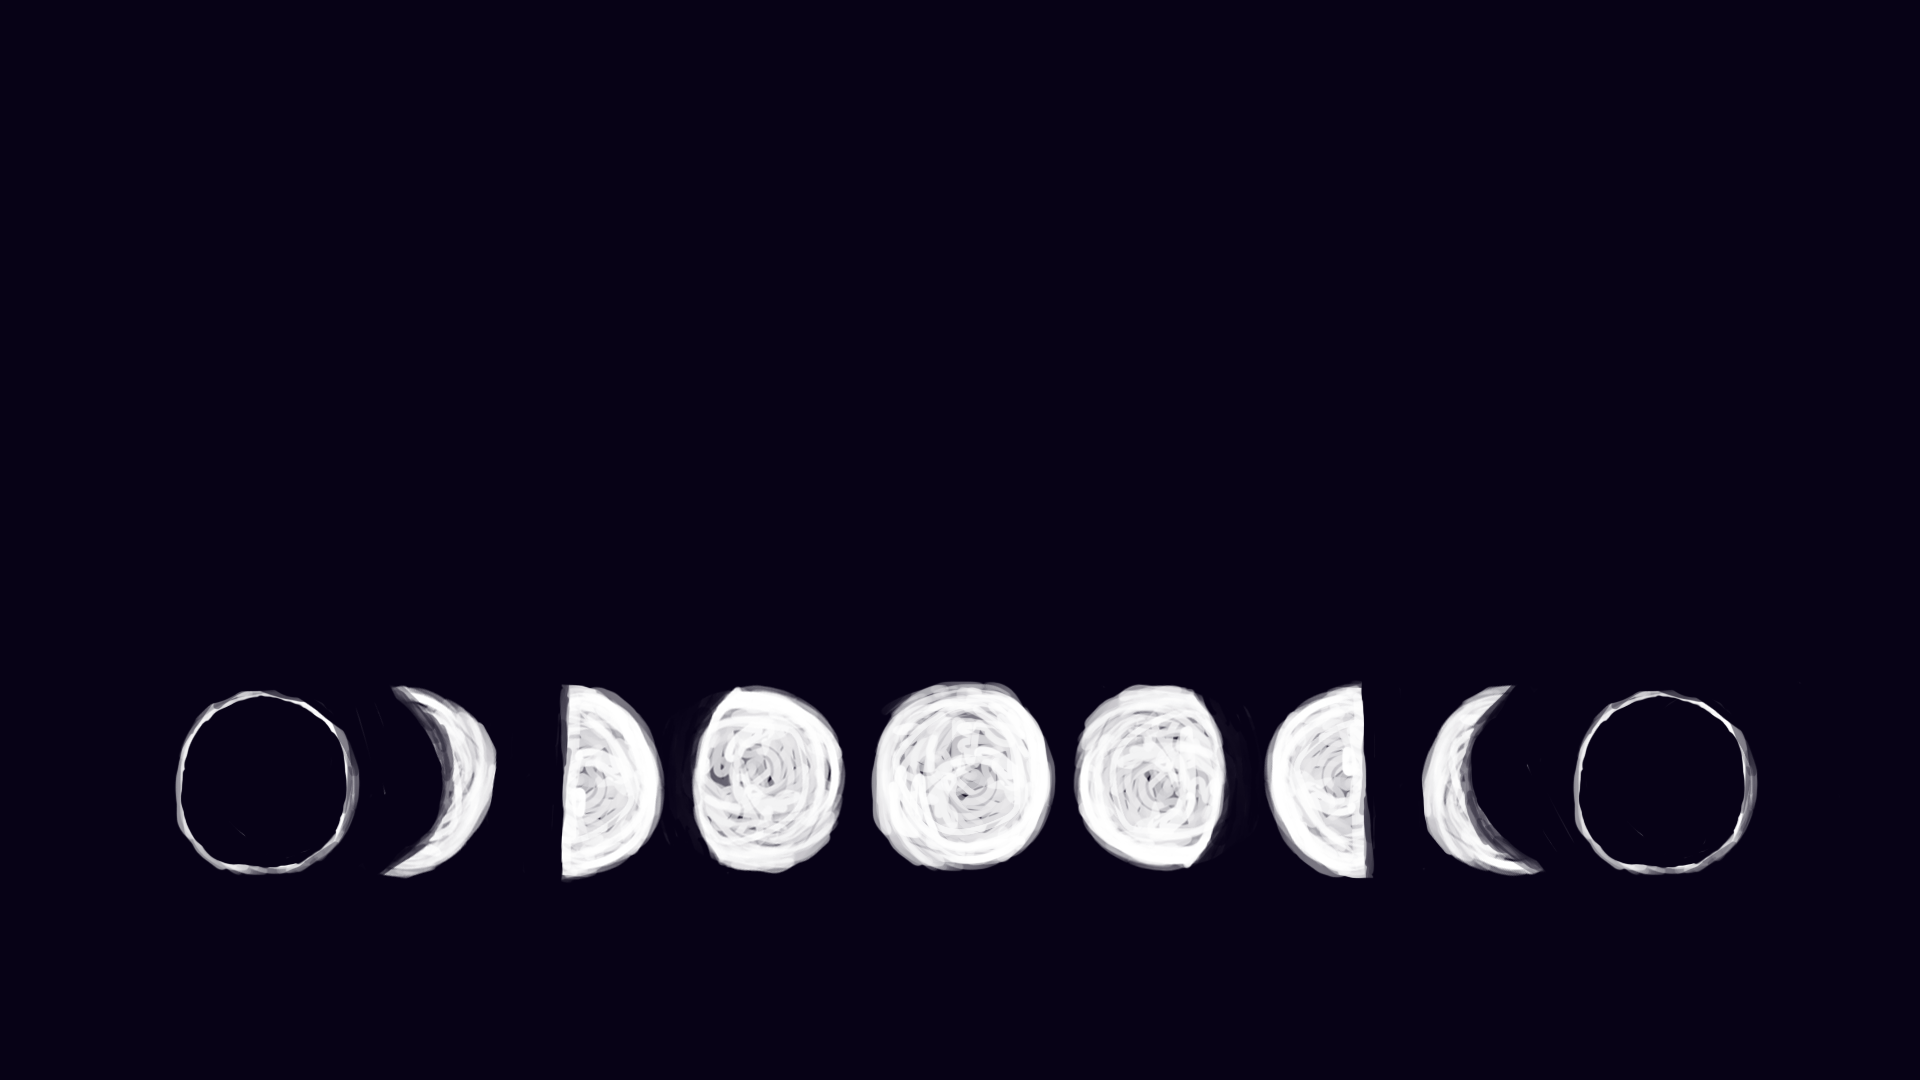 Moon phases Wallpaper